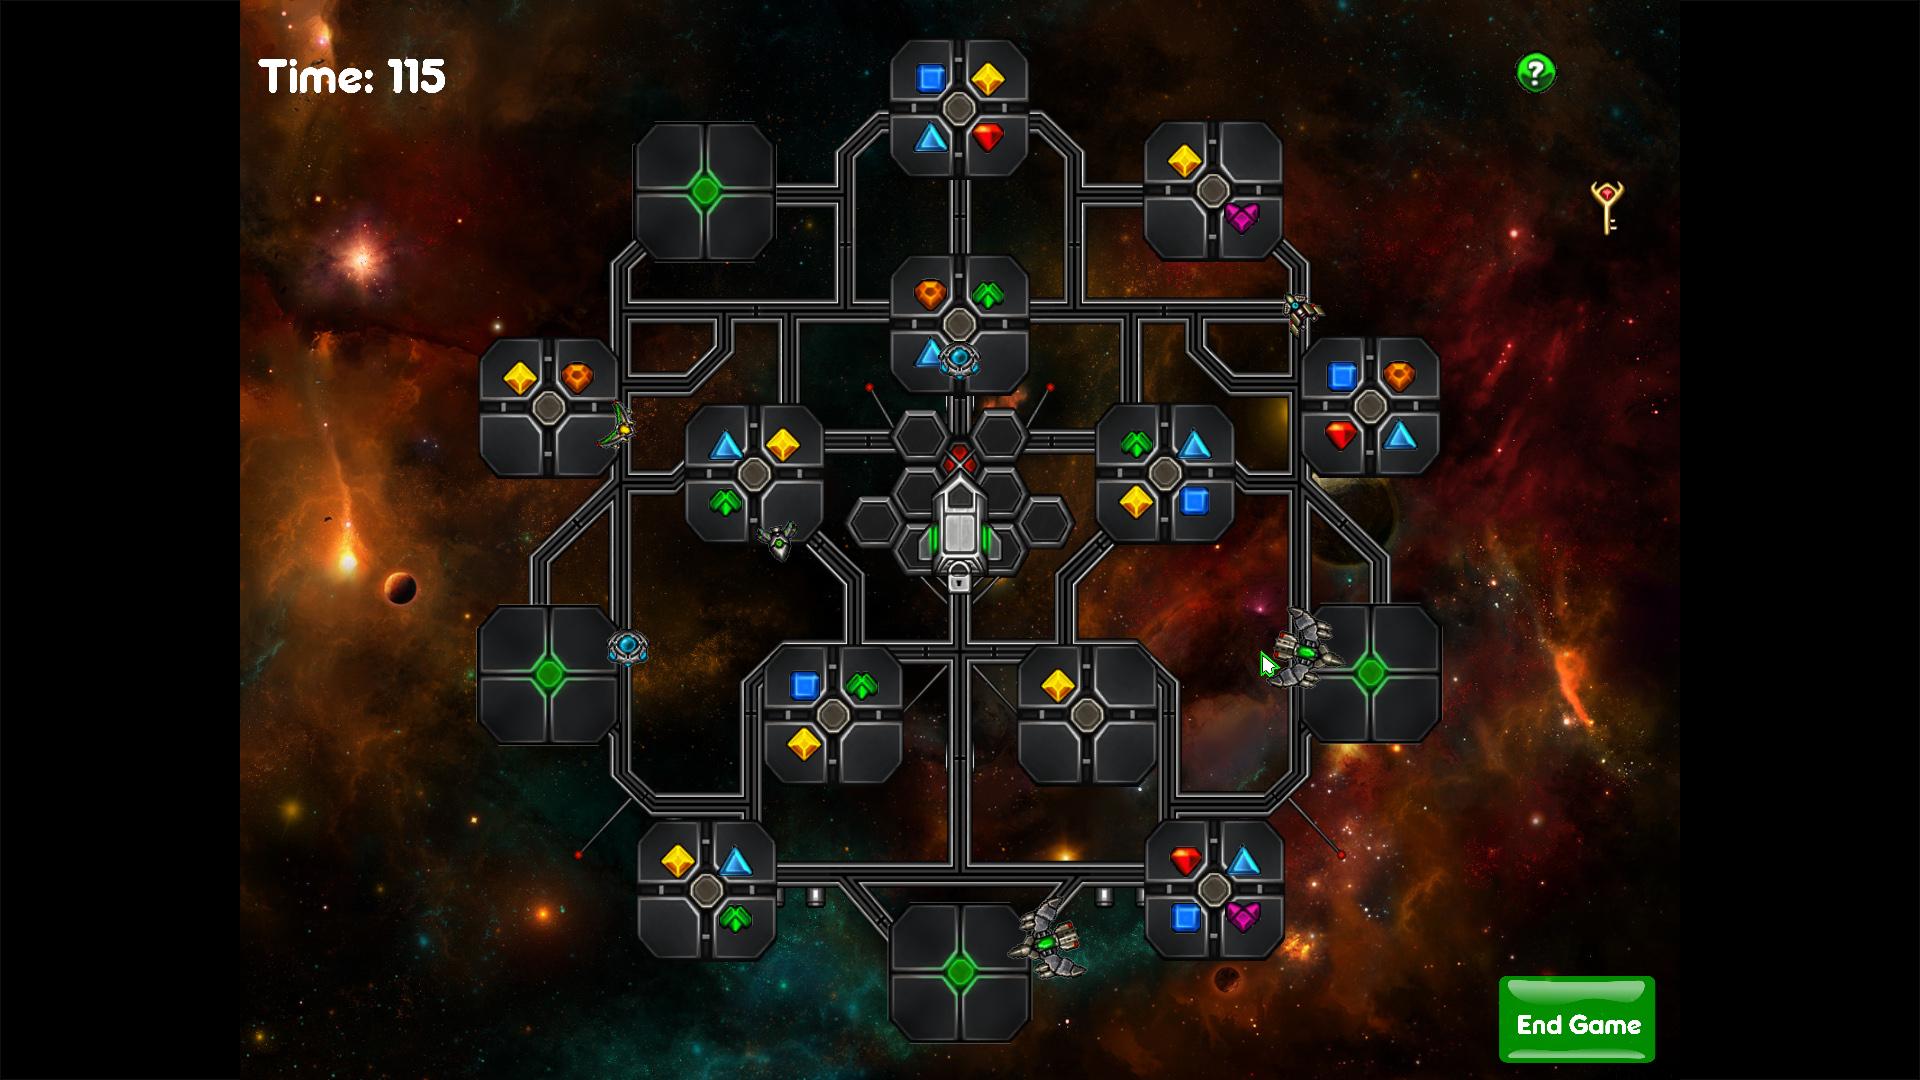 Screenshot №4 from game Puzzle Galaxies